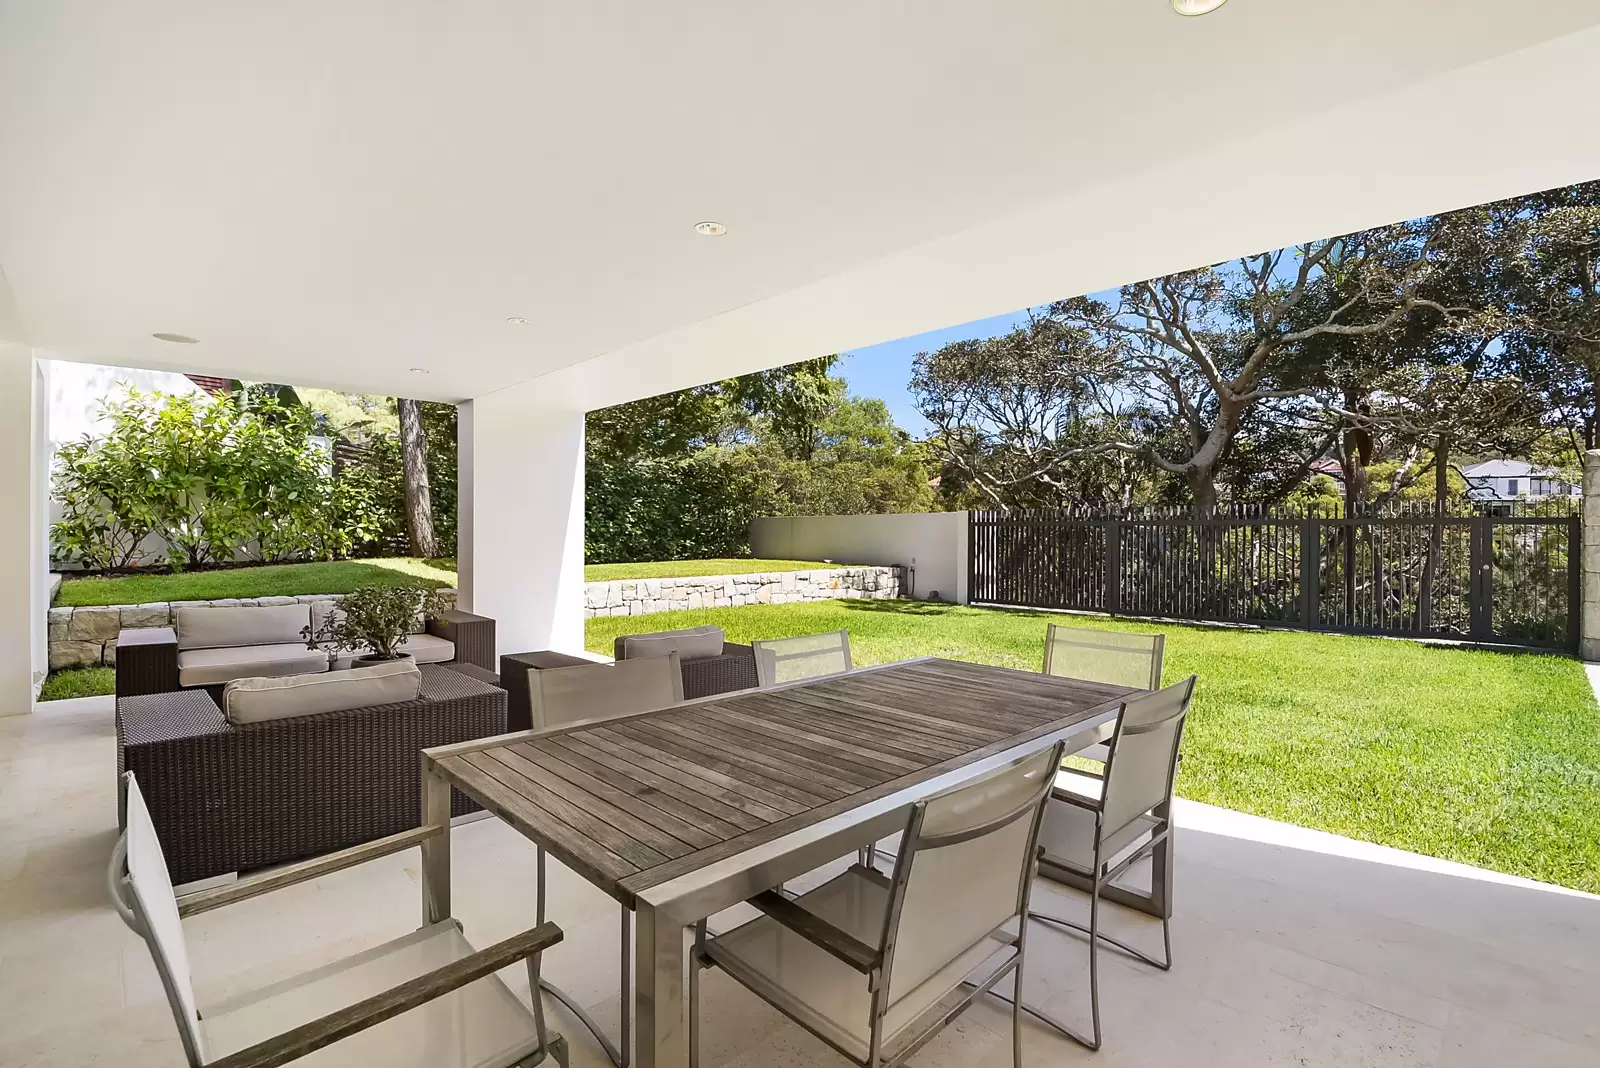 Photo #13: 10 The Crescent, Vaucluse - Sold by Sydney Sotheby's International Realty